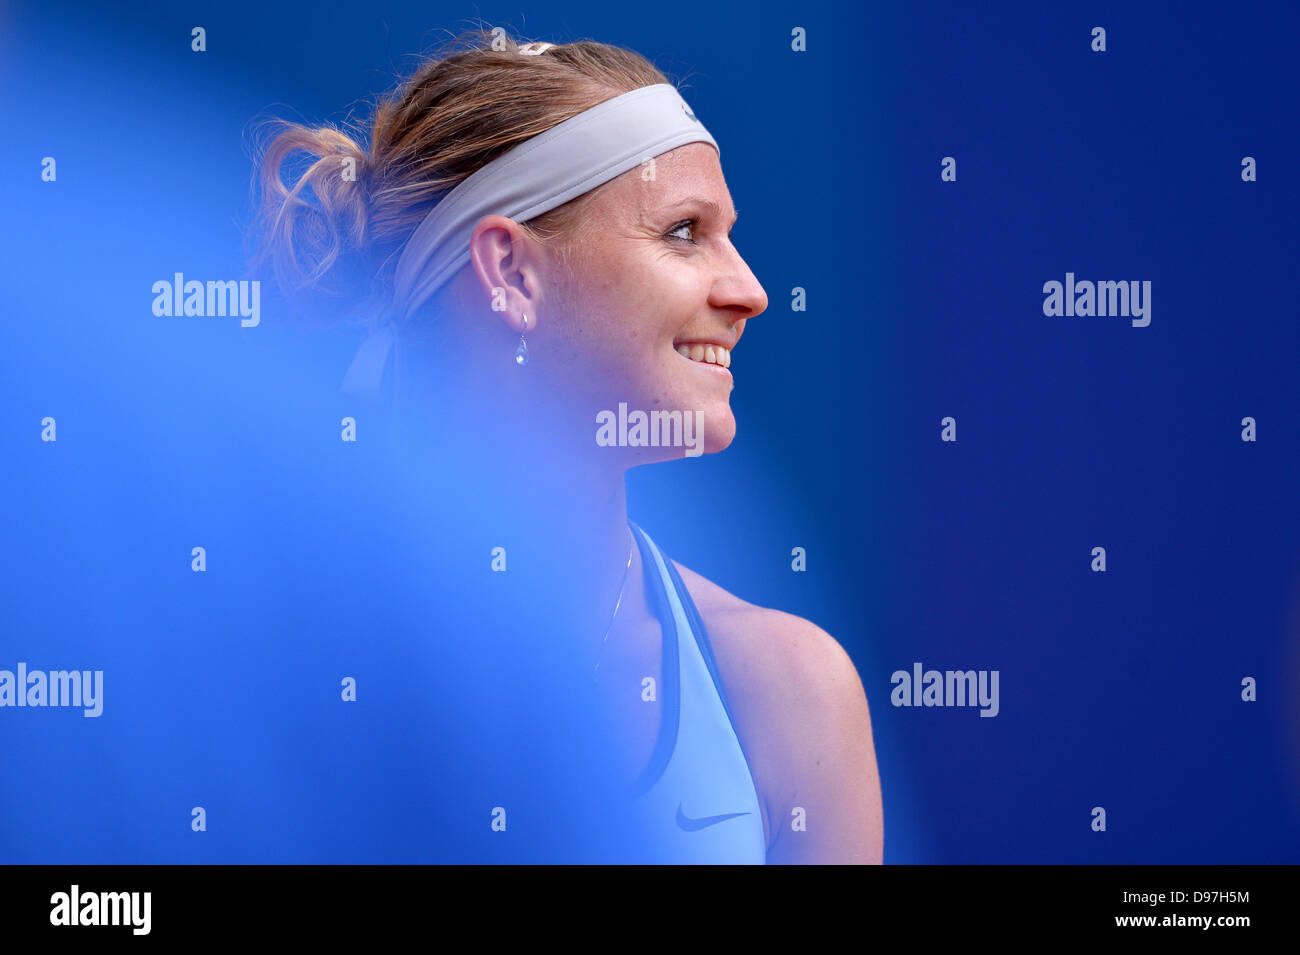 Nuremberg, Germany. 13th June, 2013. Lucie Safarova of Czech Republic in action against Polona Hercog (not in picture) during the WTA tennis tournament in Nuremberg, Germany, 13 June 2013. PHOTO: DAVID EBENER/dpa/Alamy Live News Stock Photo